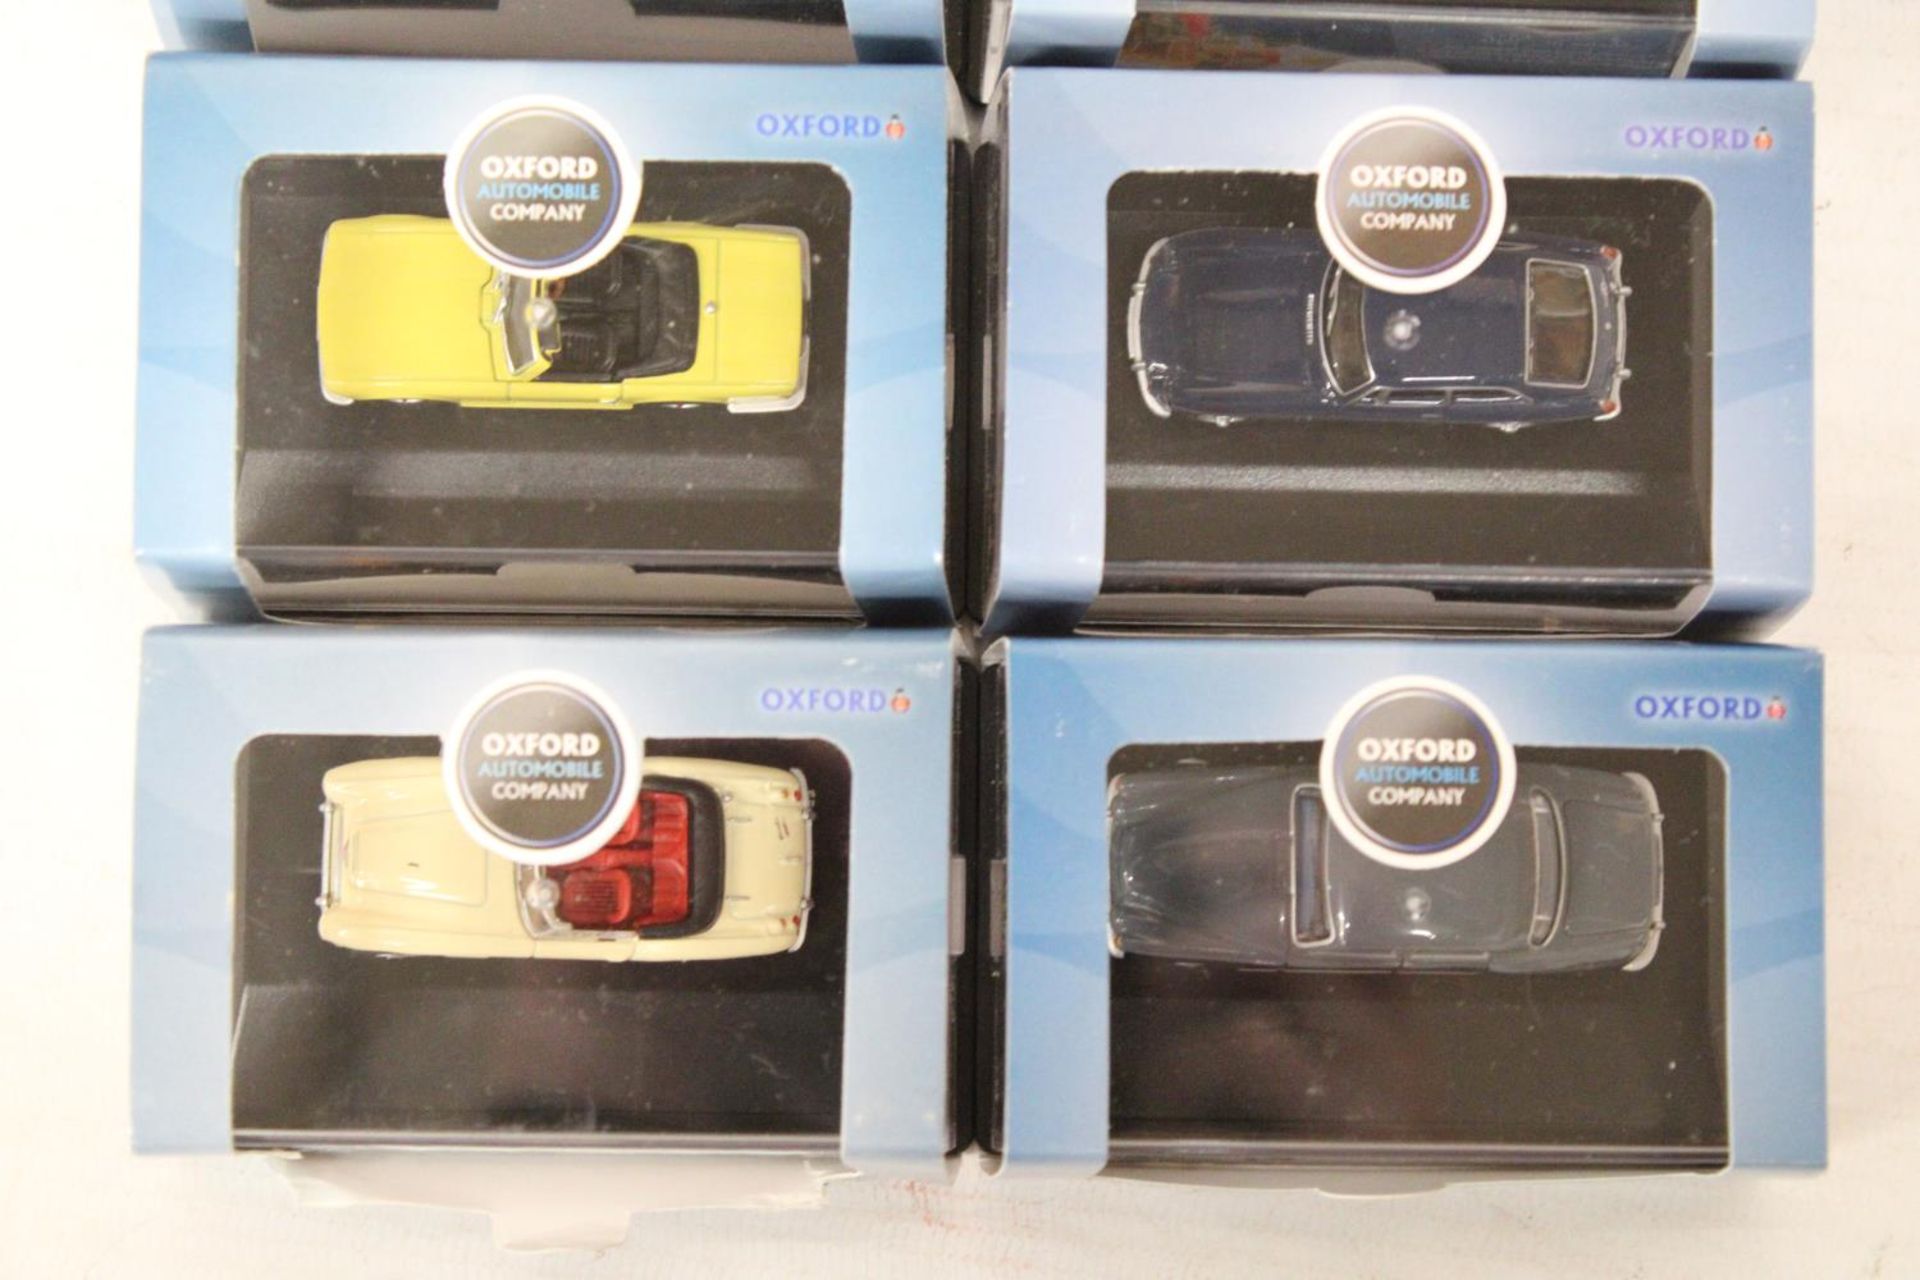 SIX VARIOUS AS NEW AND BOXED OXFORD AUTOMOBILE COMPANY VEHICLES - Image 5 of 5